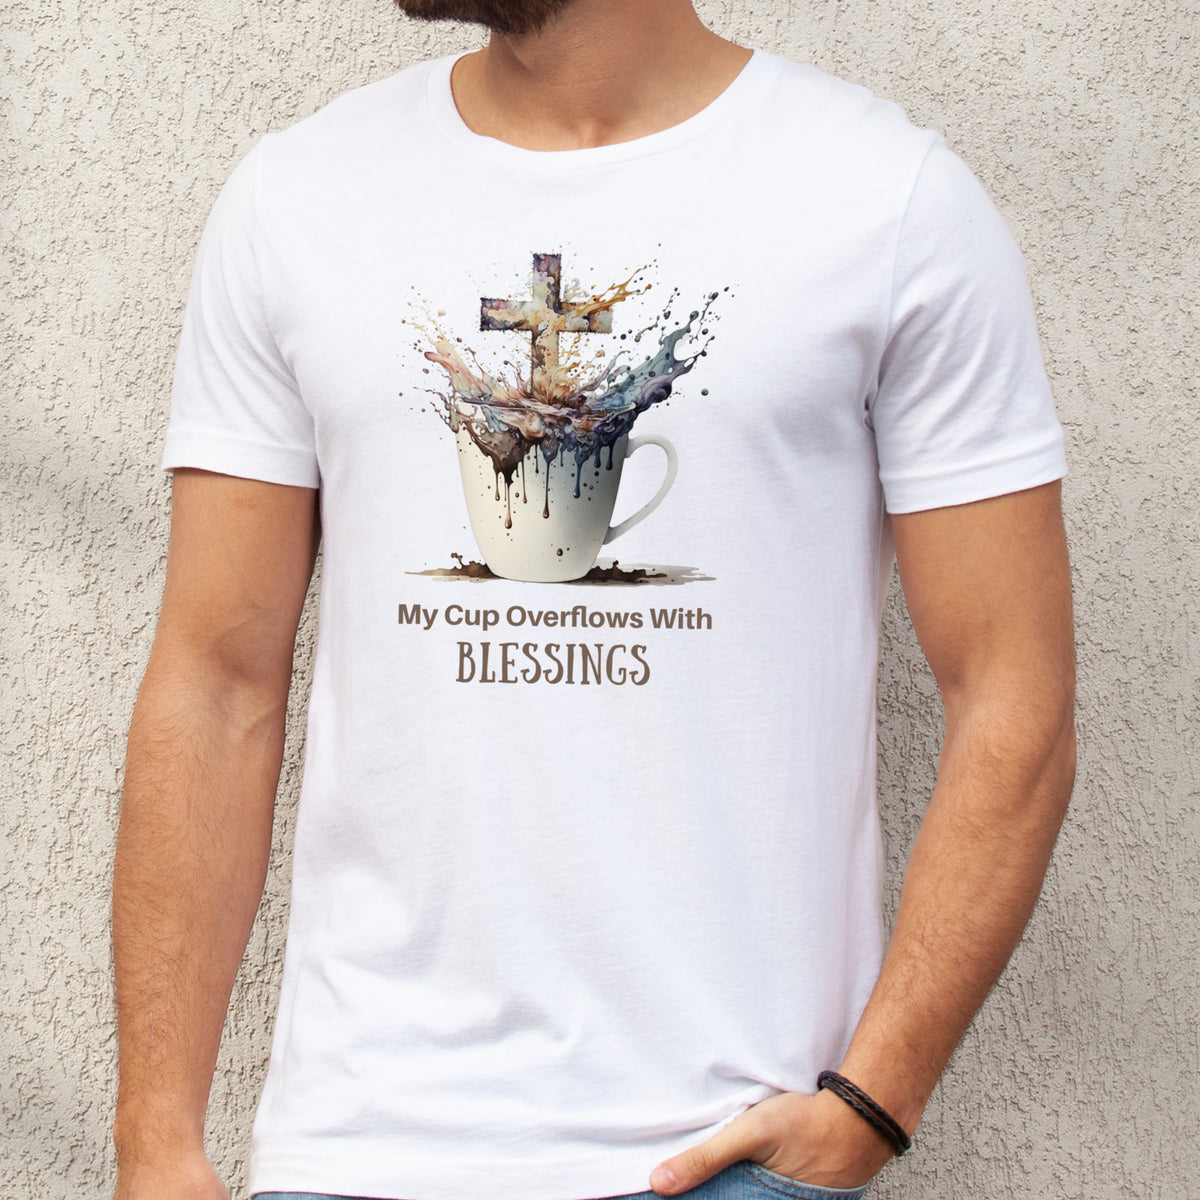 My Cup Overflows With Blessings - Men's Christian T-Shirt